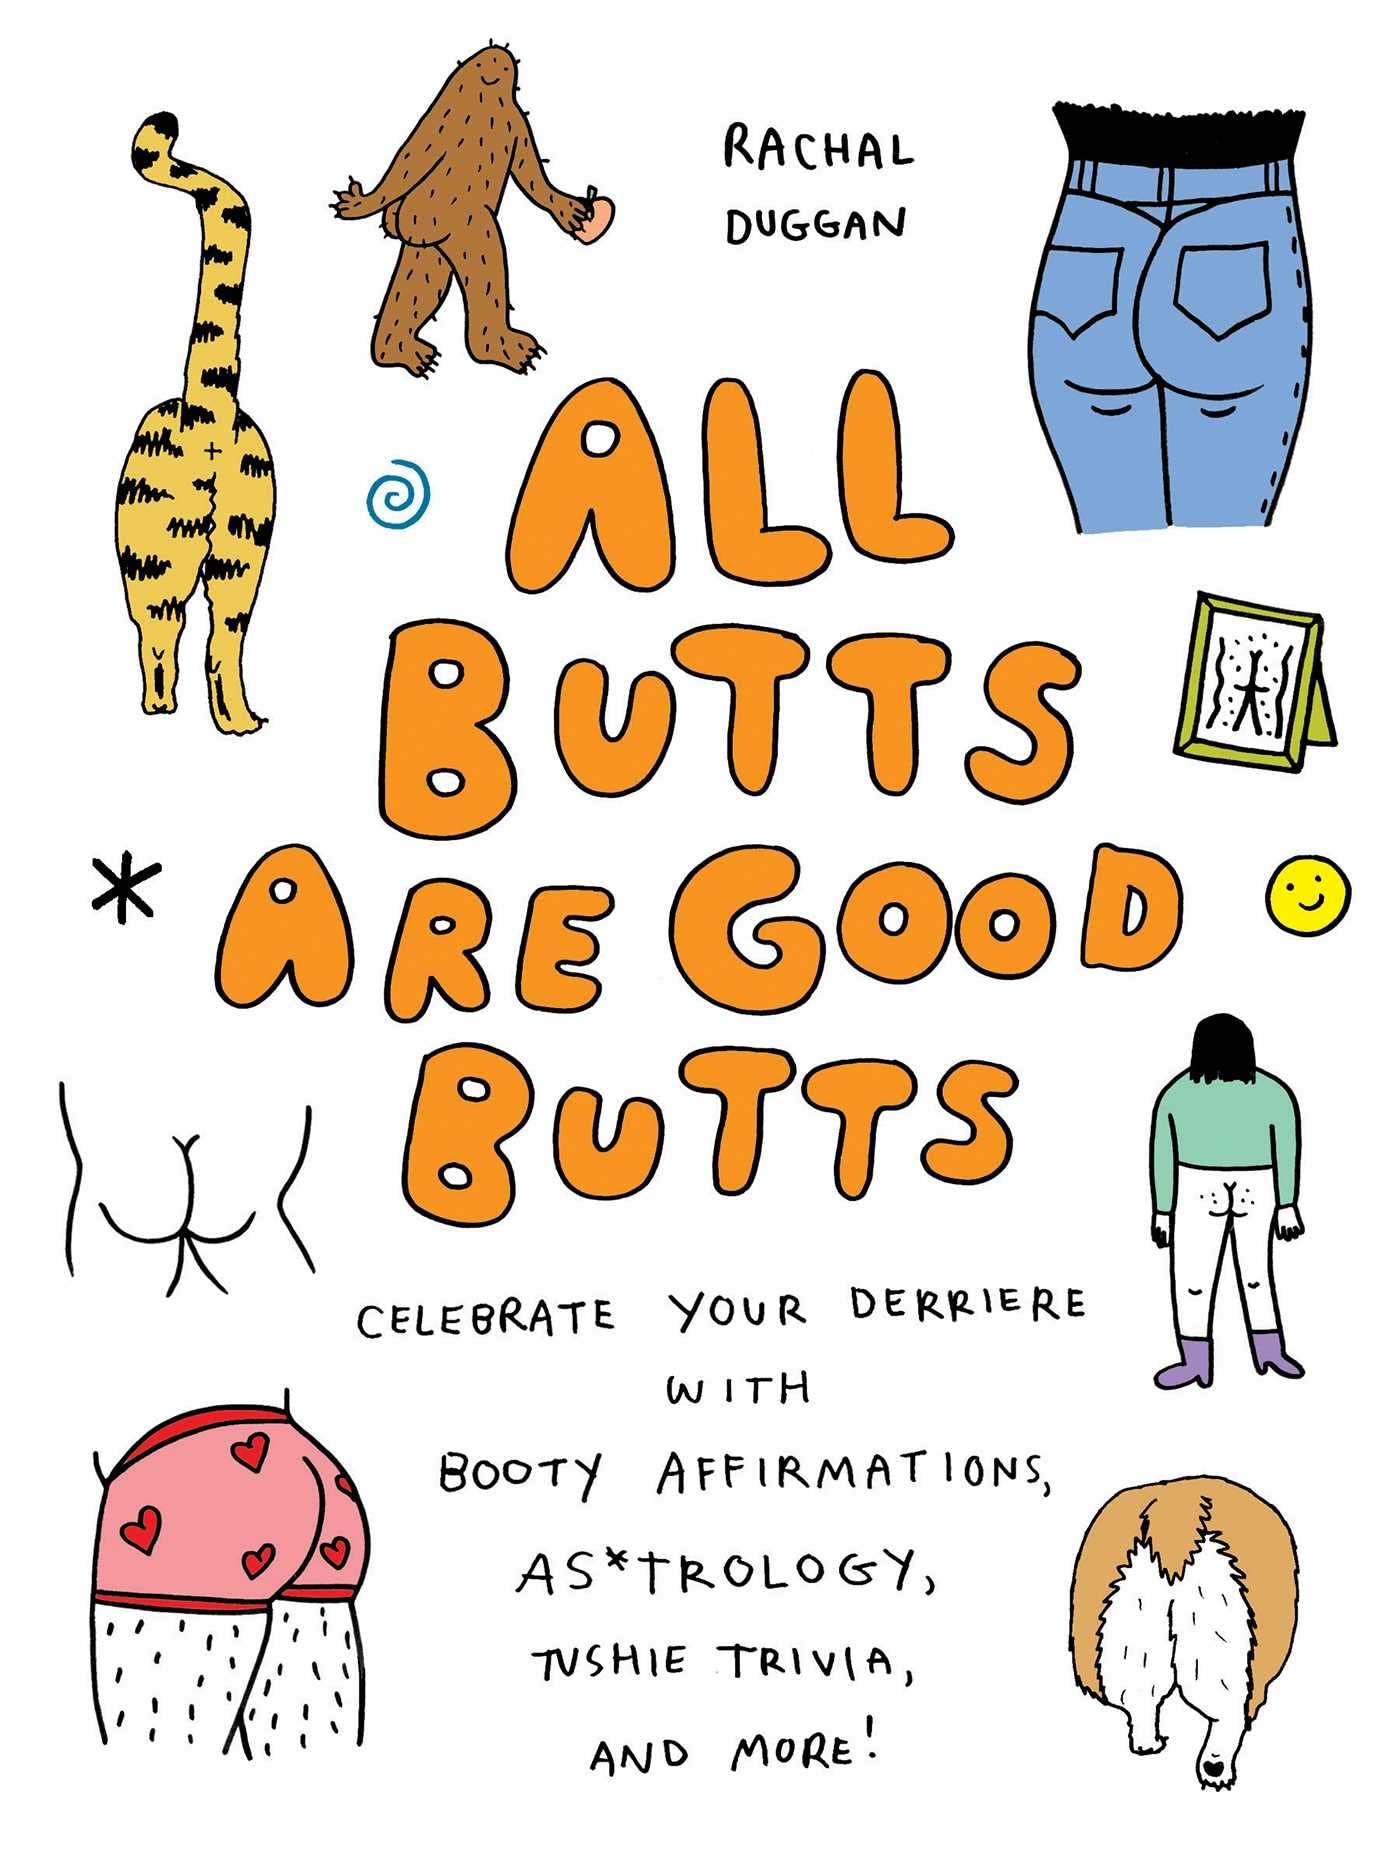 All Butts Are Good Butts Book